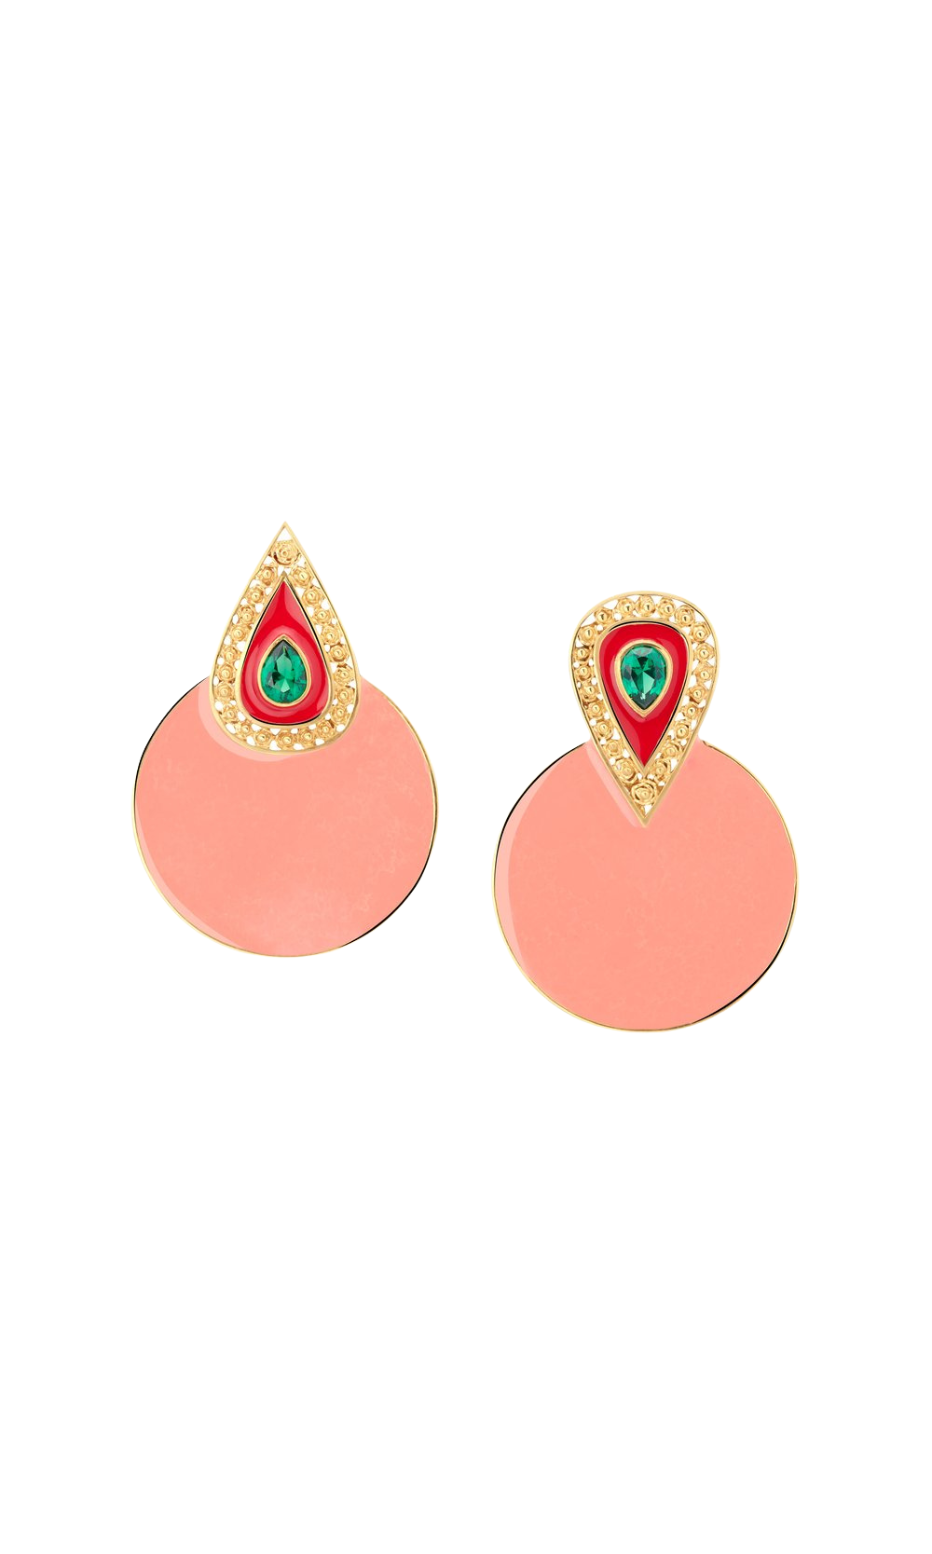 Round Statement Earrings with V-Shape